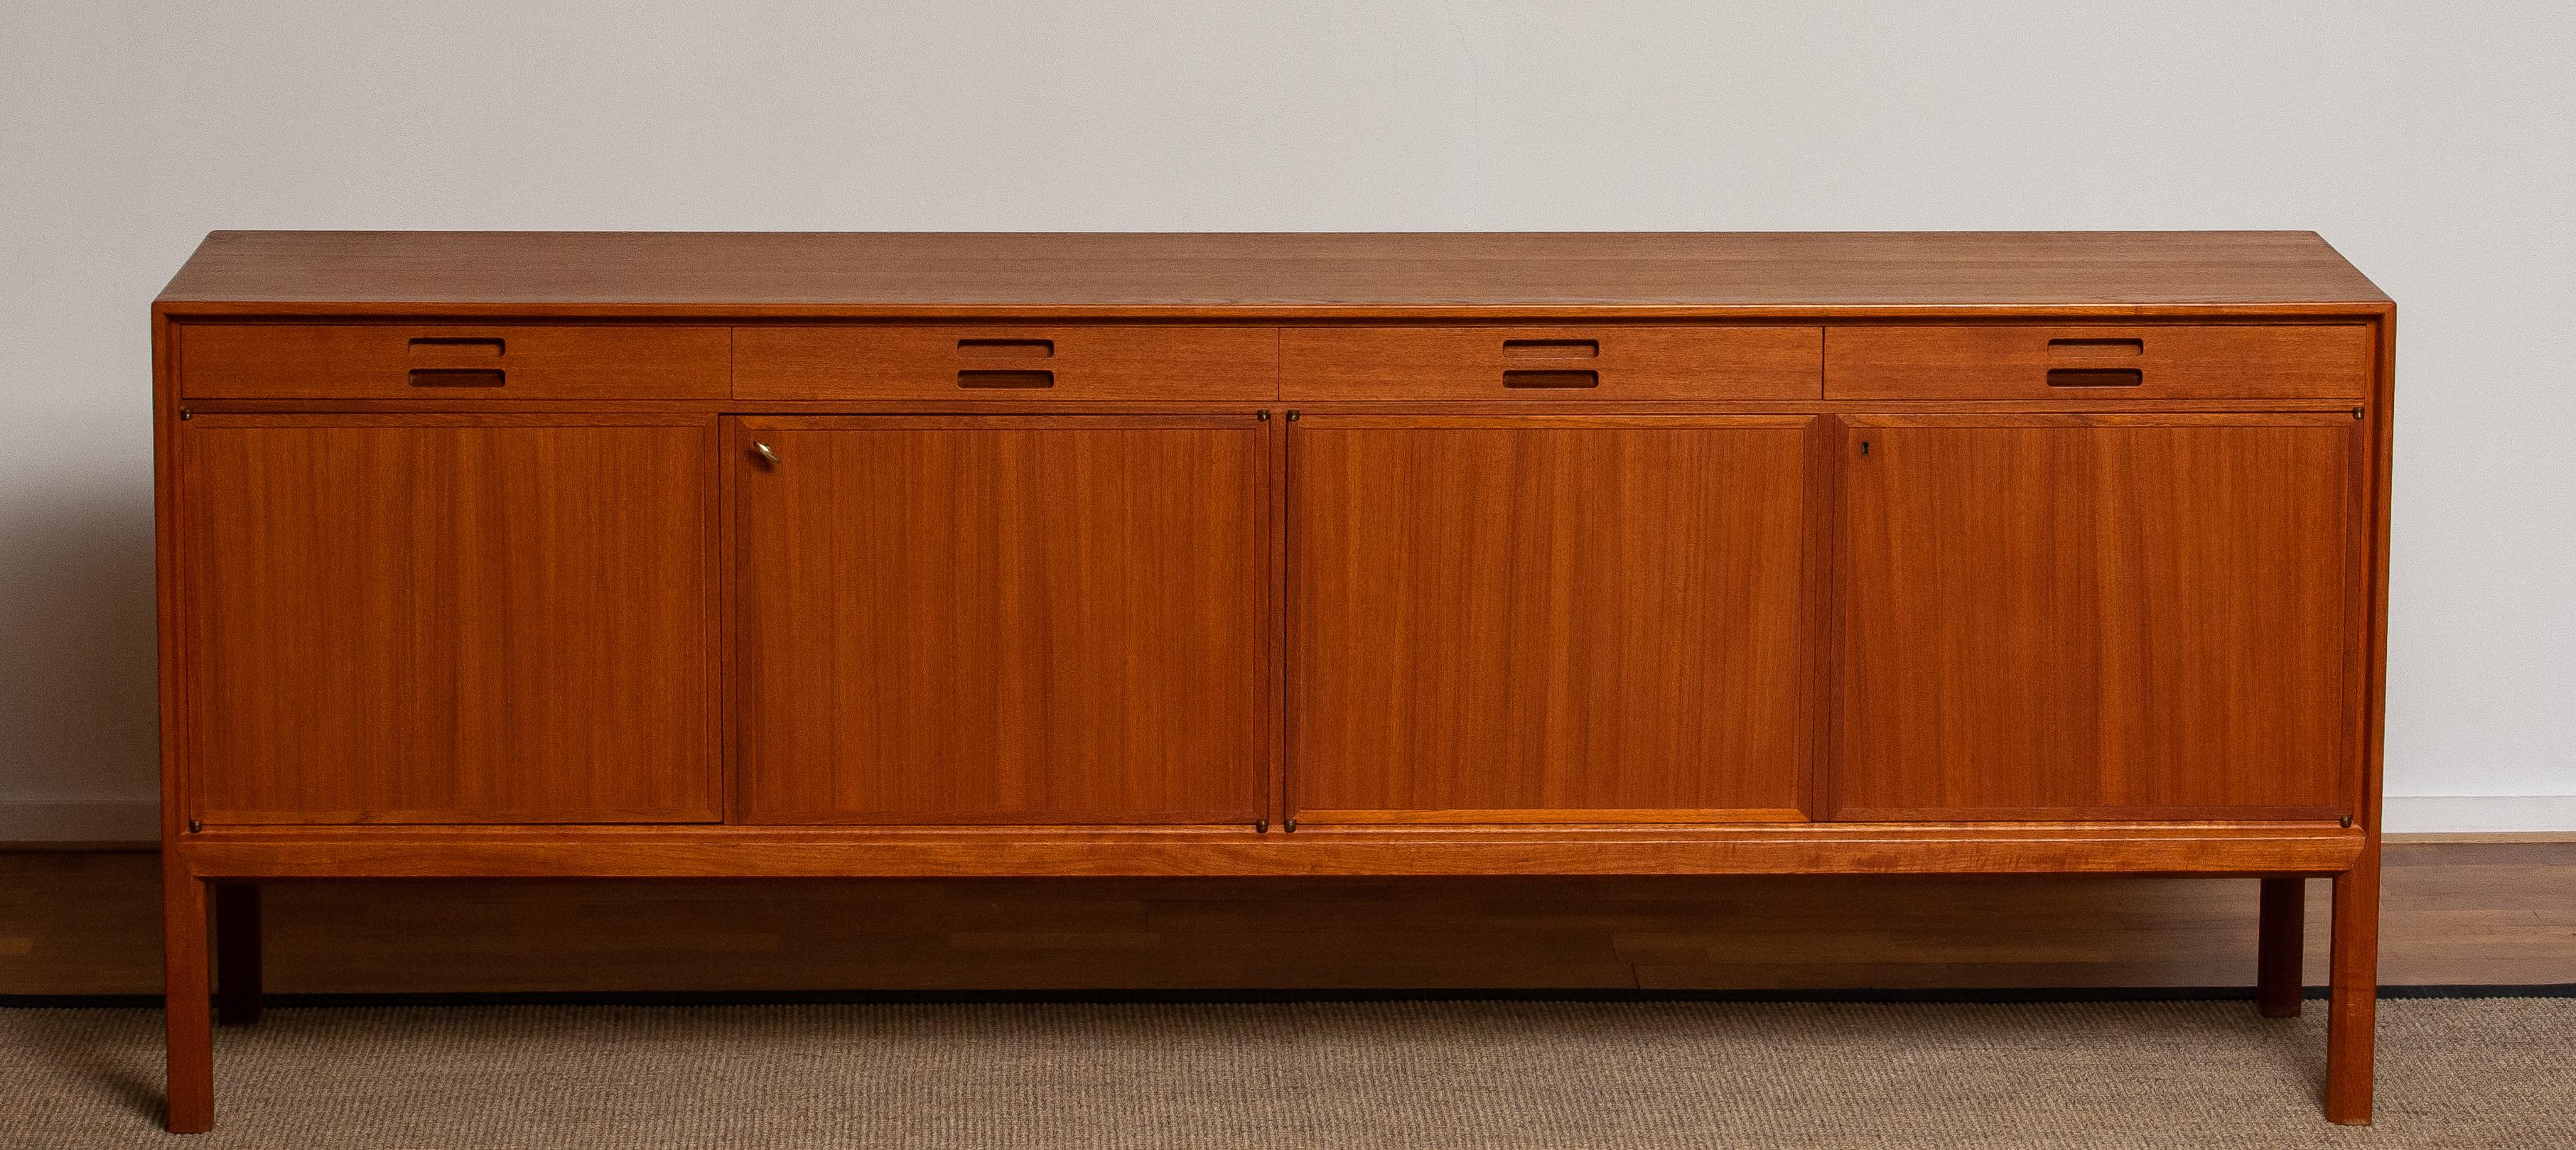 Teak sideboard designed by Bertil Fridhagen for Bodafors Bra Bohag from Sweden.
The sideboard is in an excellent condition. Period 1950s.
      